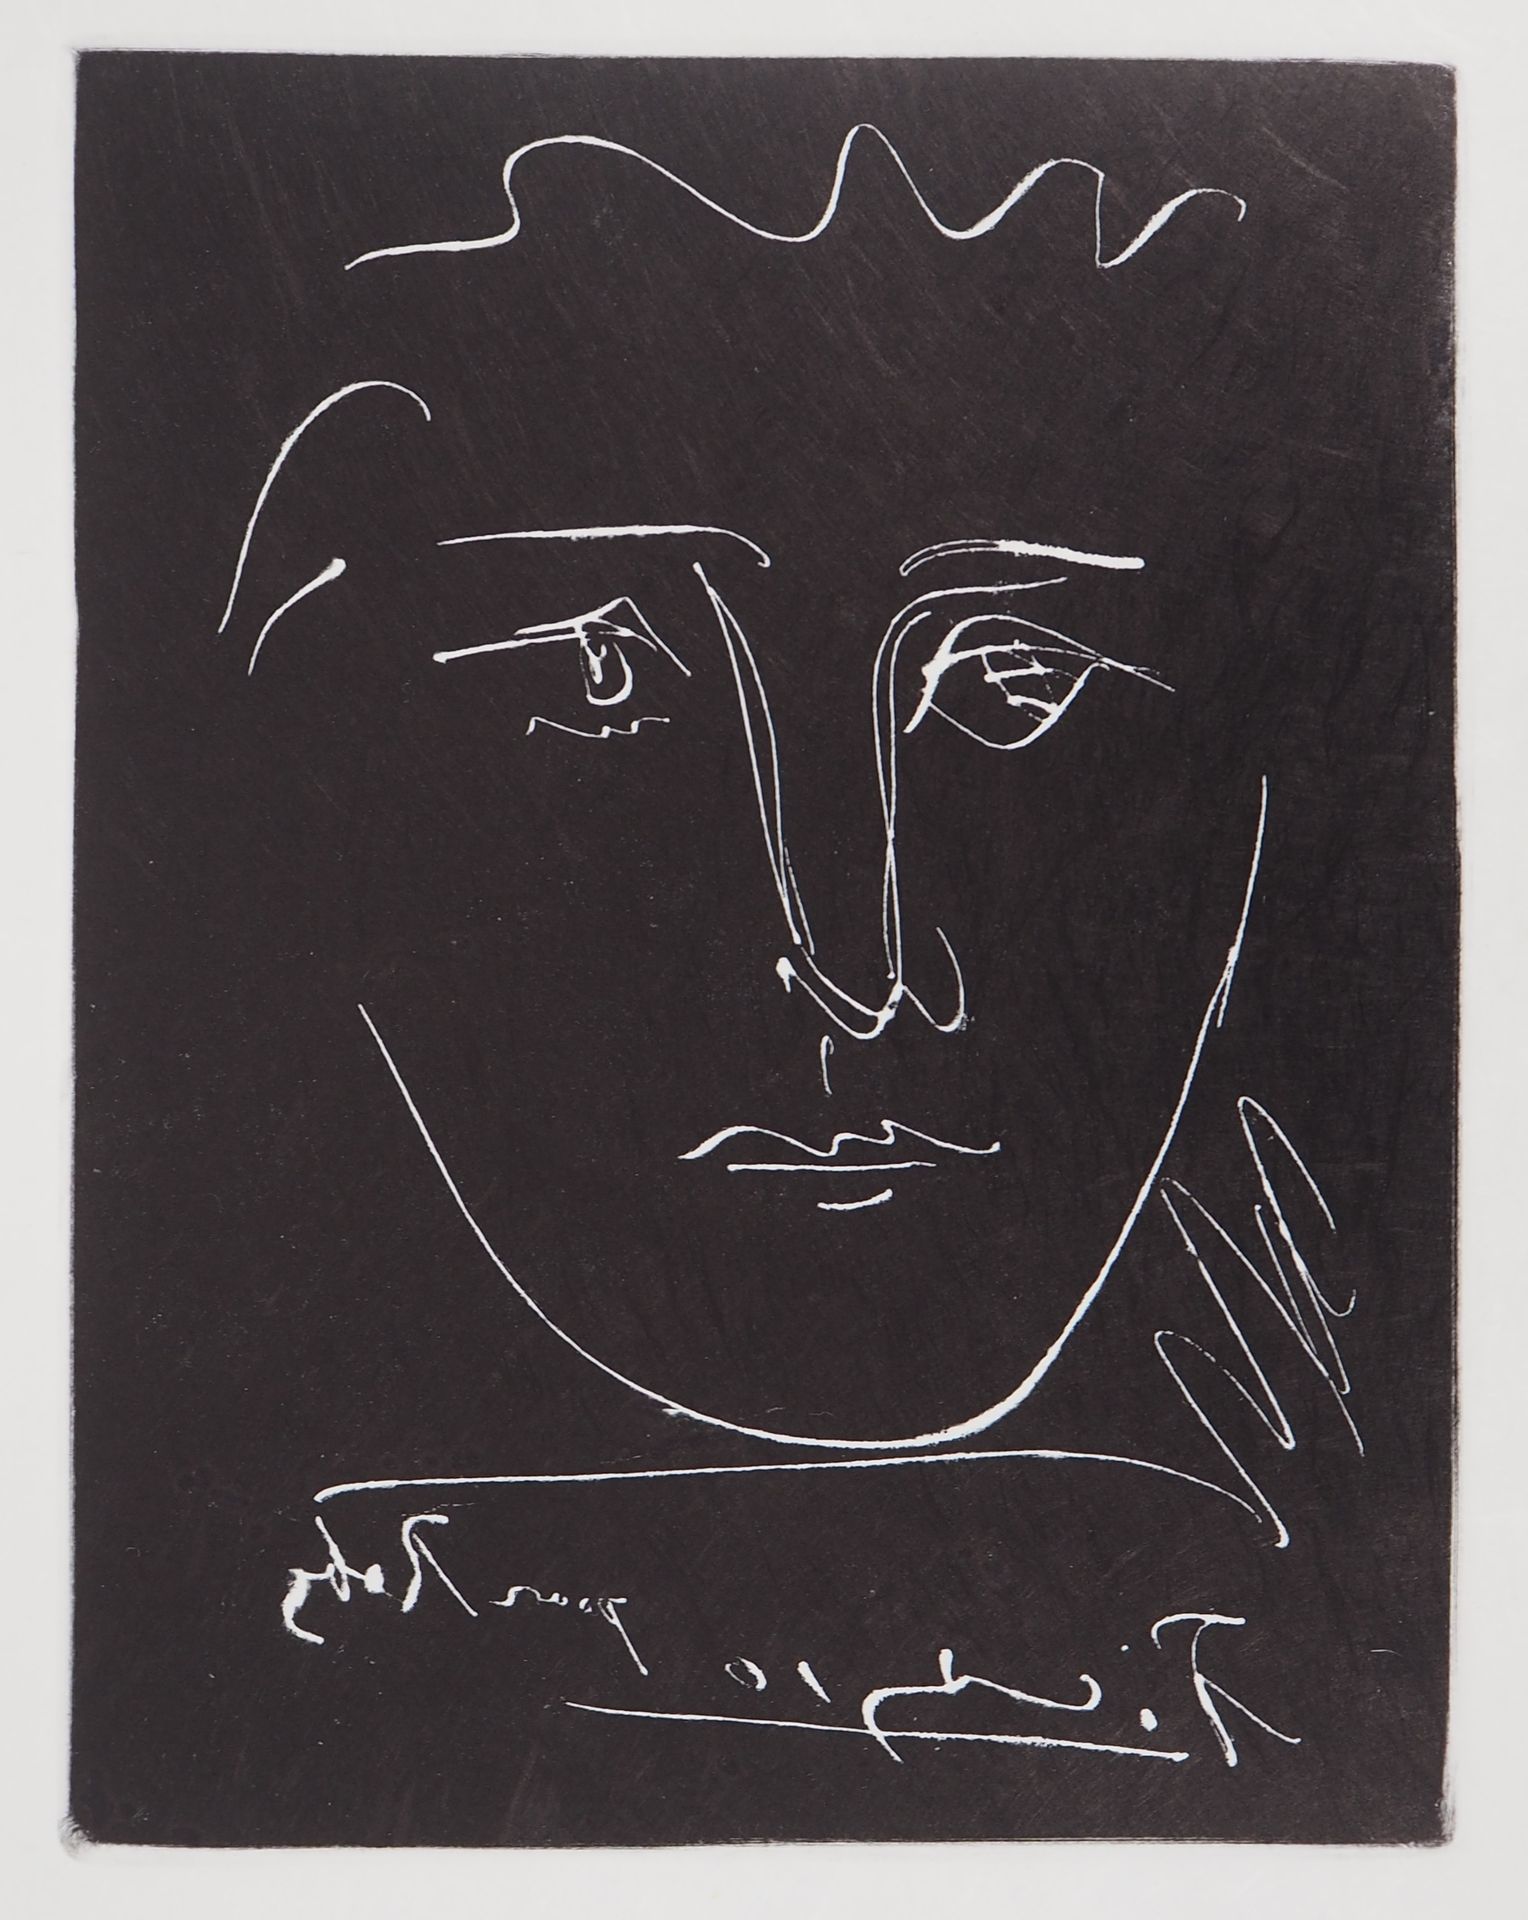 Pablo PICASSO Pablo Picasso (1881-1973)(after)

Face for Roby

Engraving in blac&hellip;